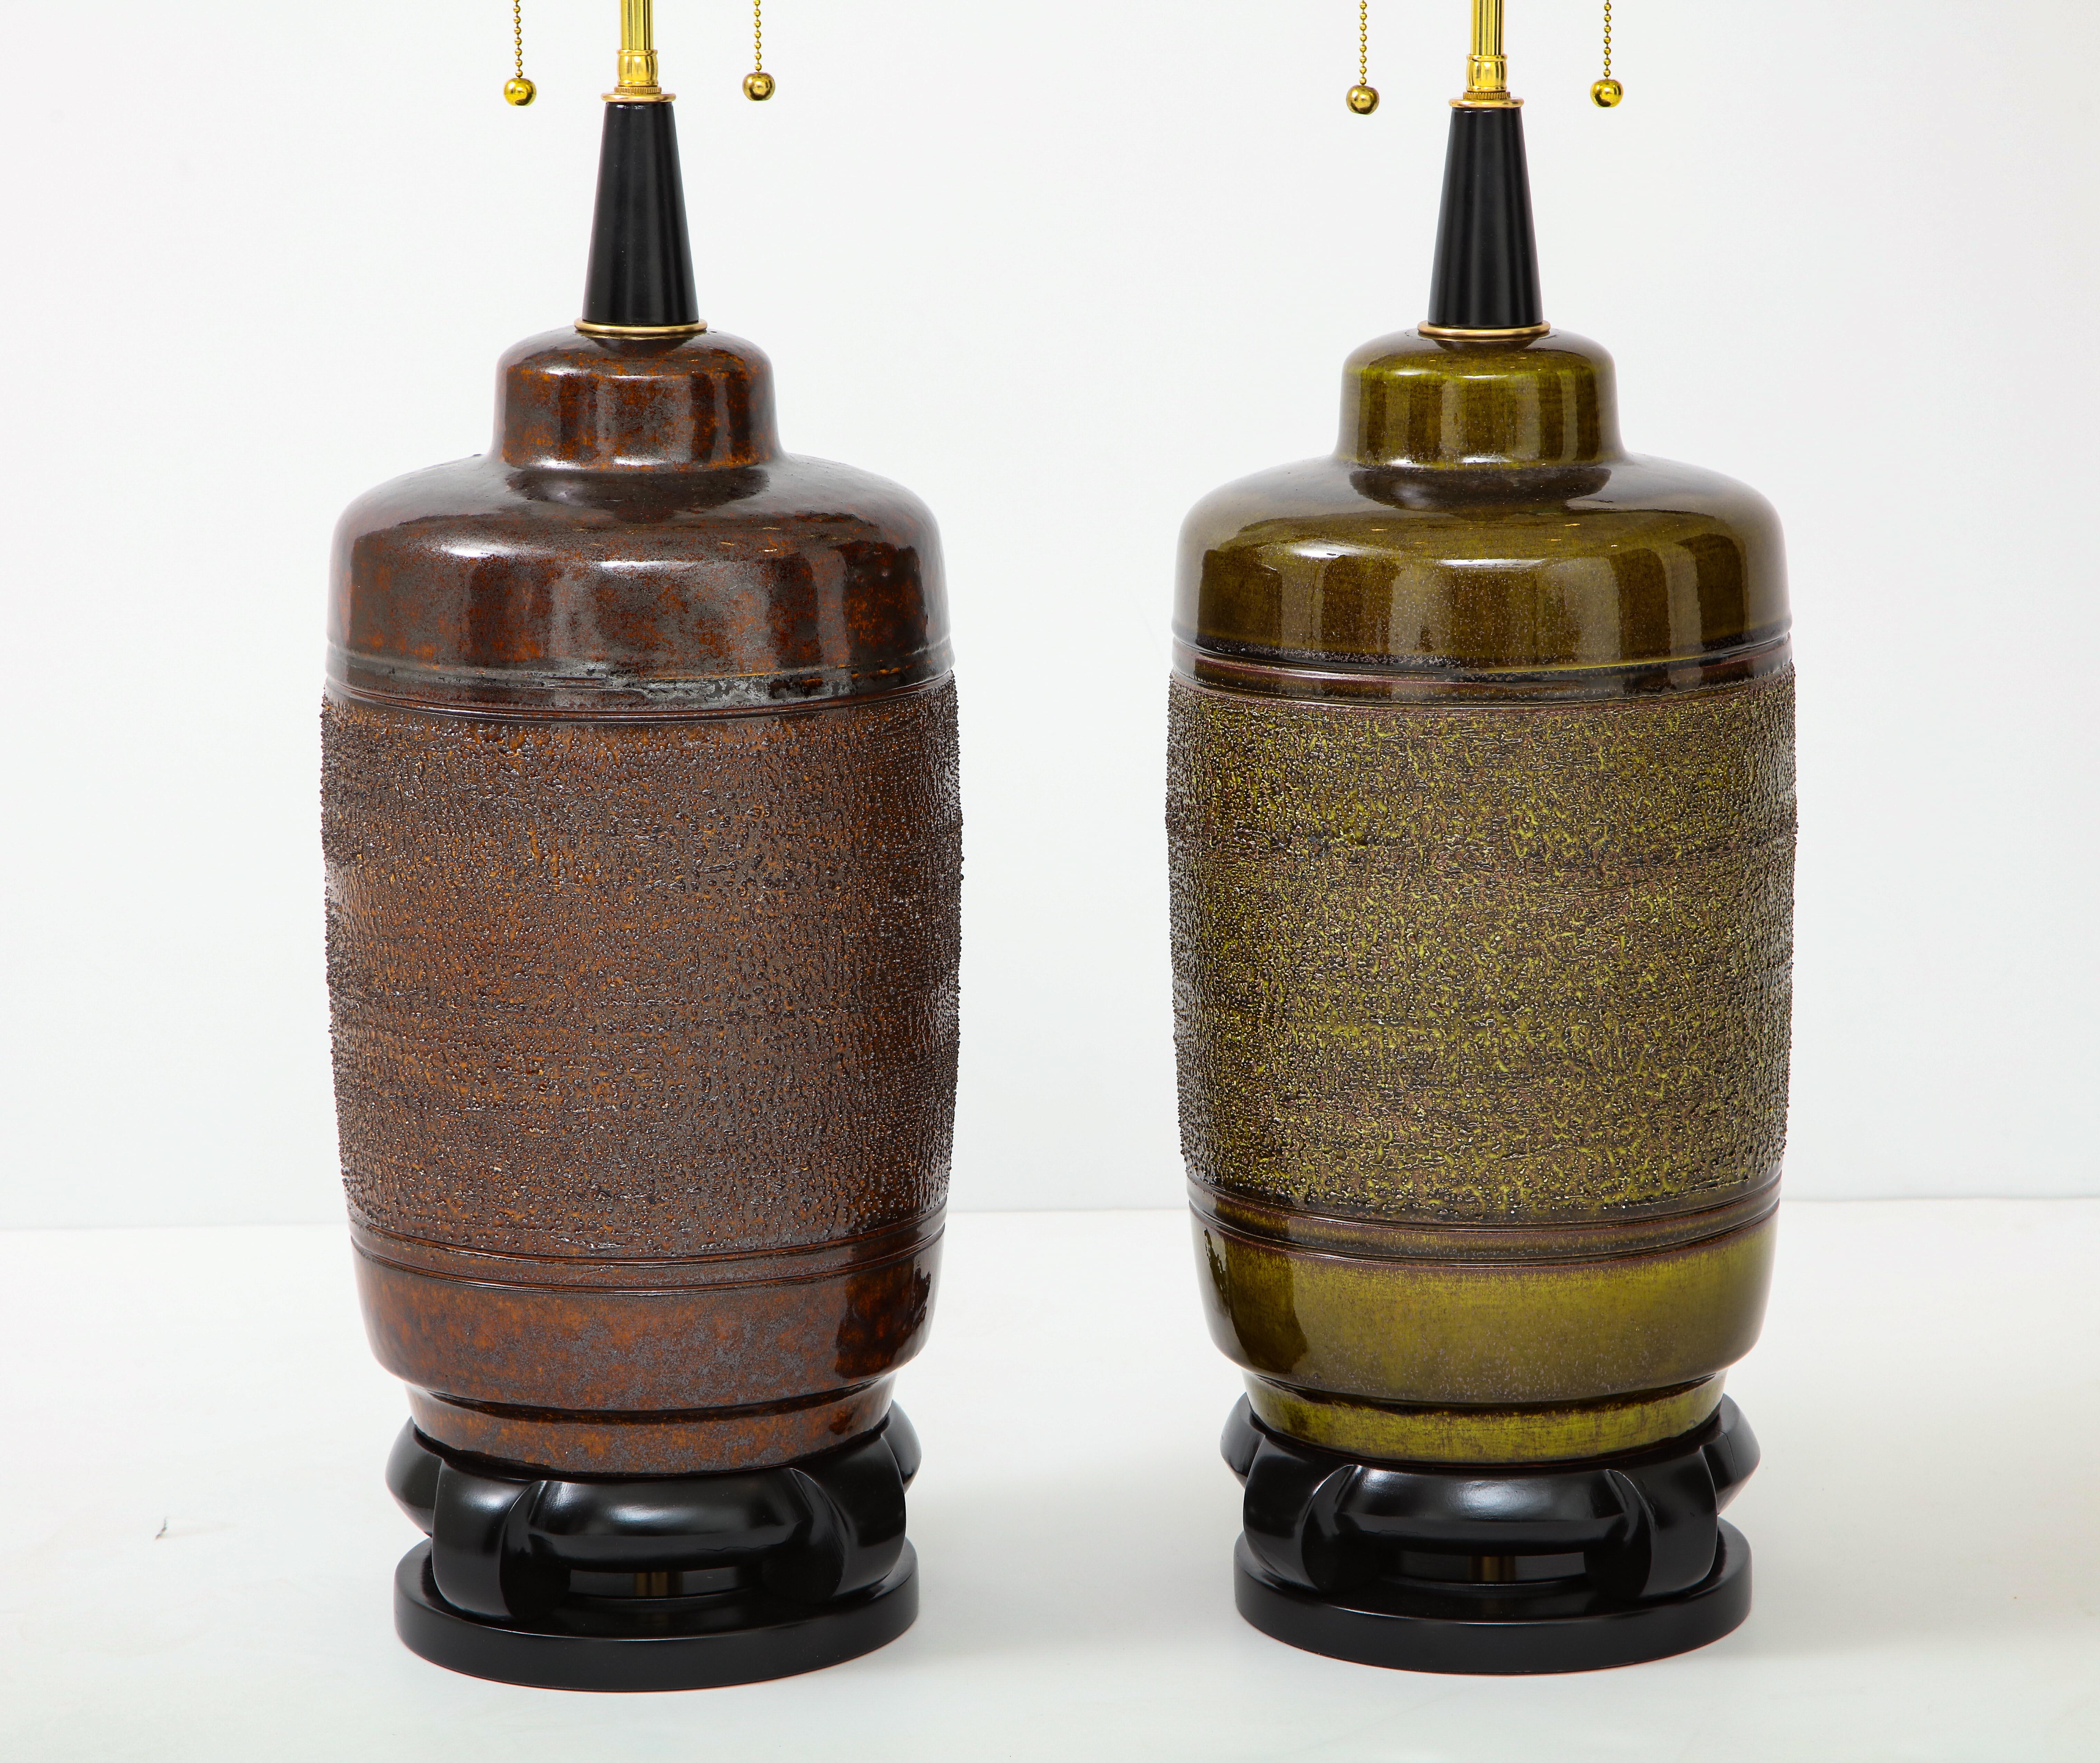 Large near matched pair of ceramic lamps by Paul Hanson.
The large ceramic lamp bodies have a textured glazed finish.
One lamp has a moss green glaze and the other a brown glaze.
The lamps have been newly rewired with polished brass double